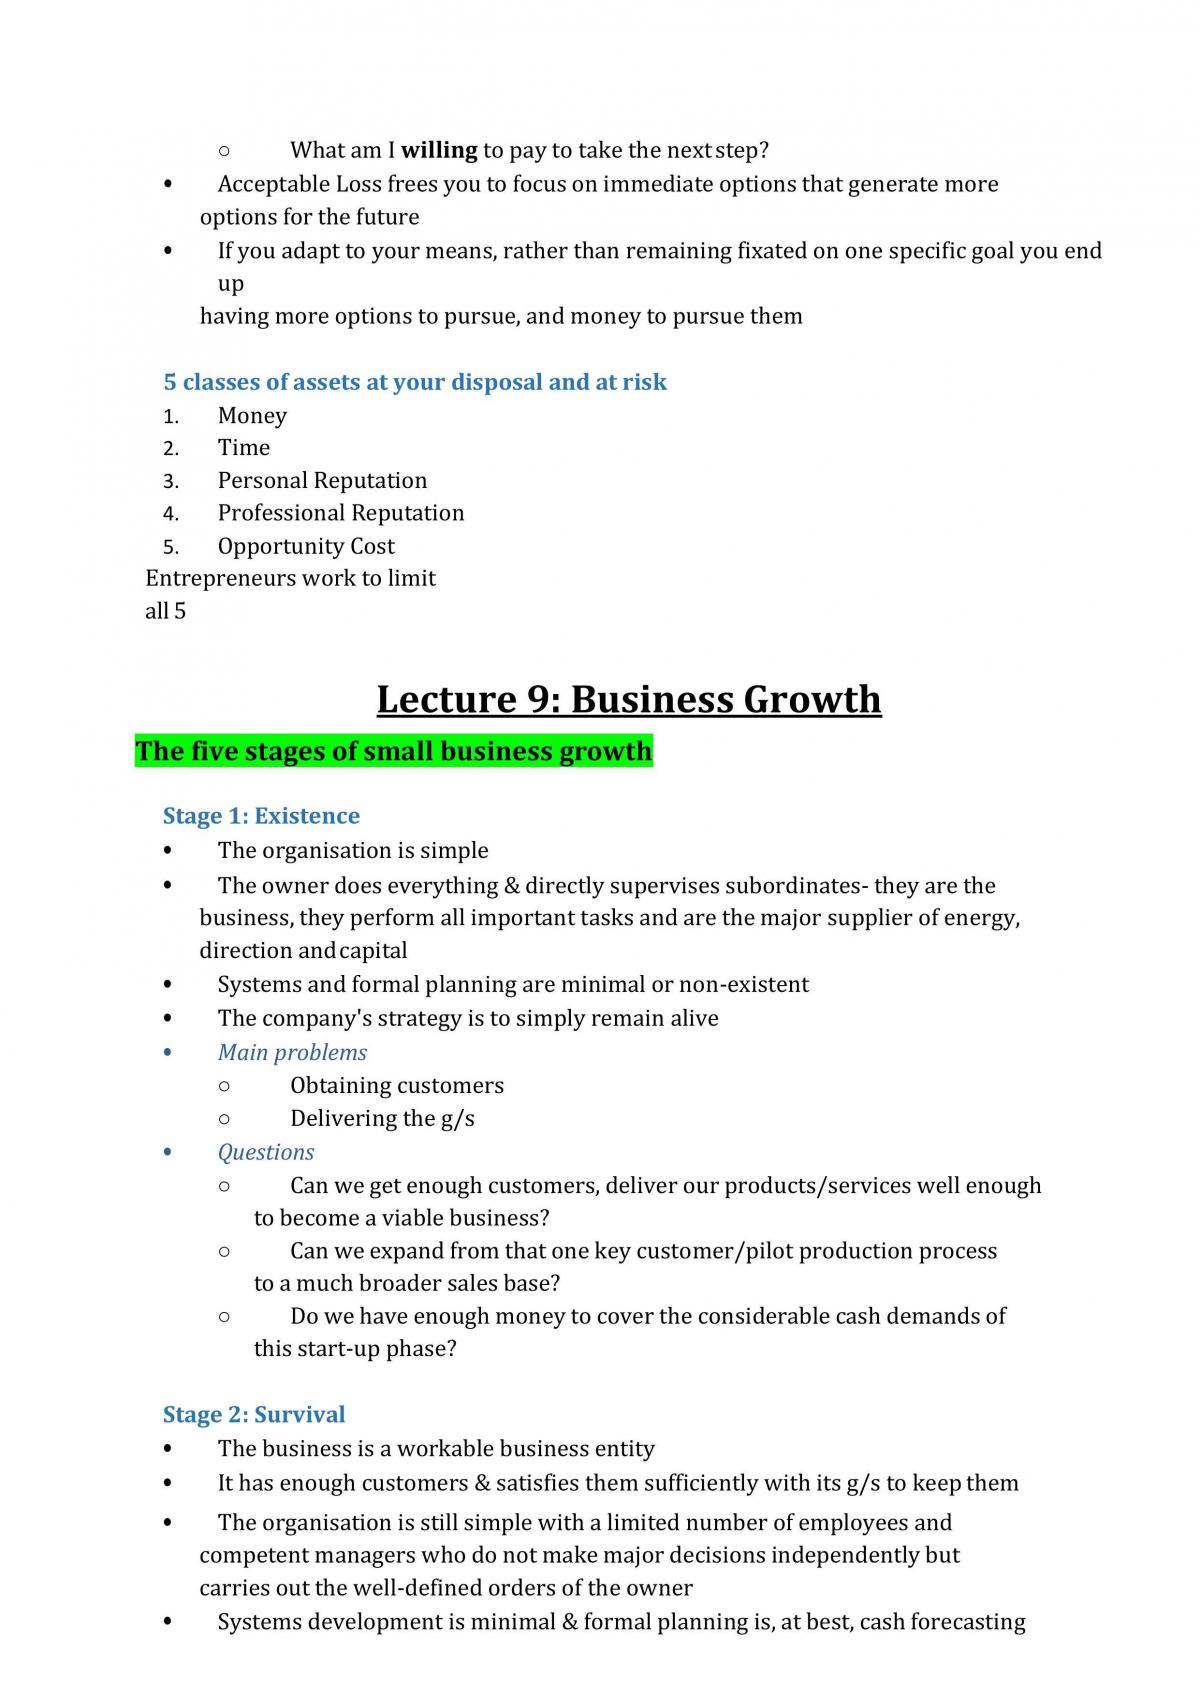 Business and Enterprise 2 Full Modules Notes - Page 29